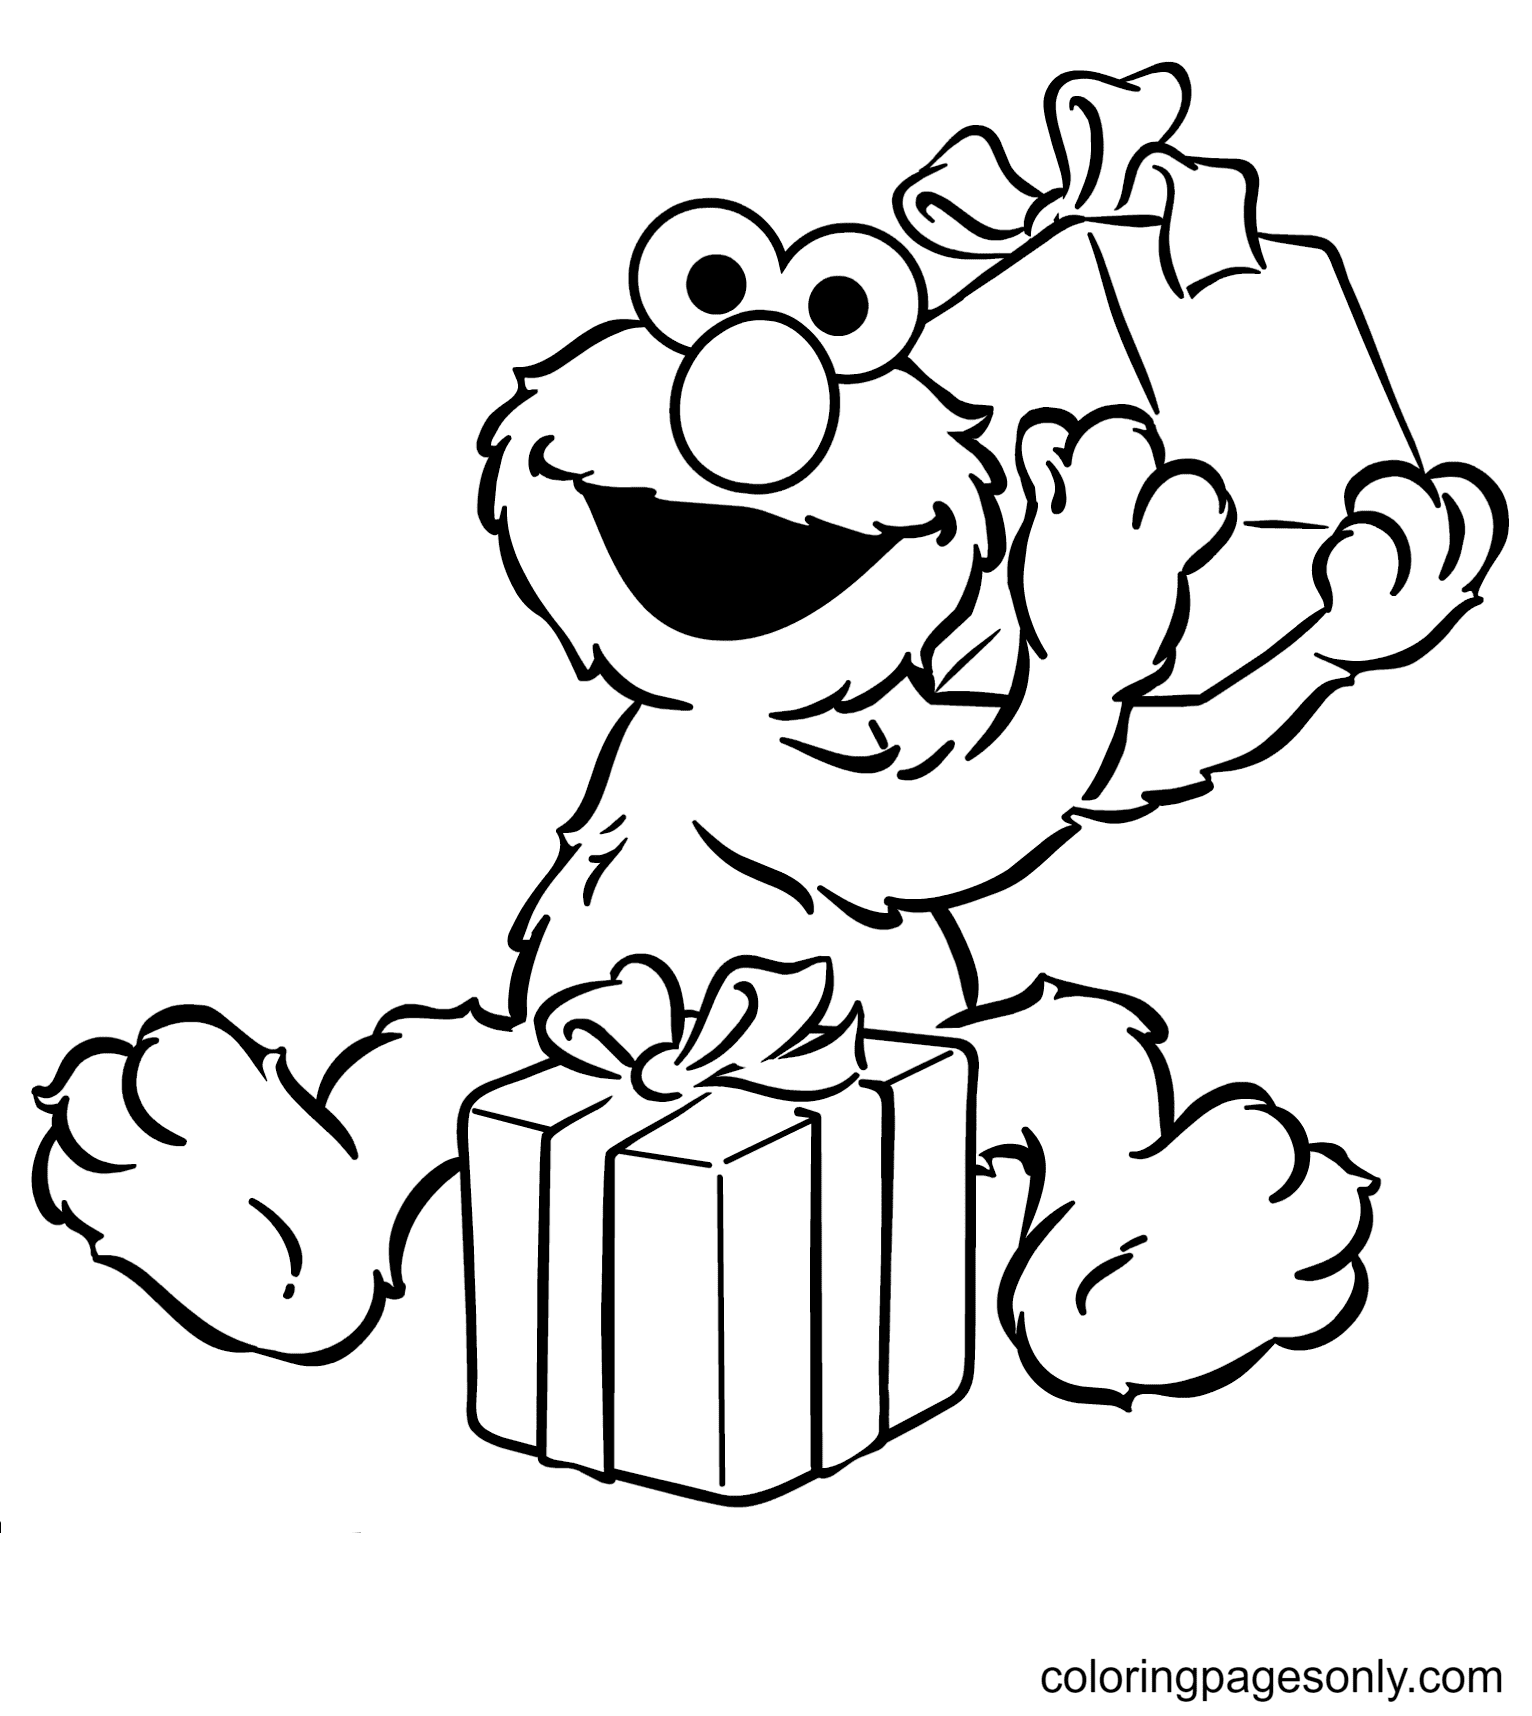 Elmo Opening Birthday Presents Coloring Pages